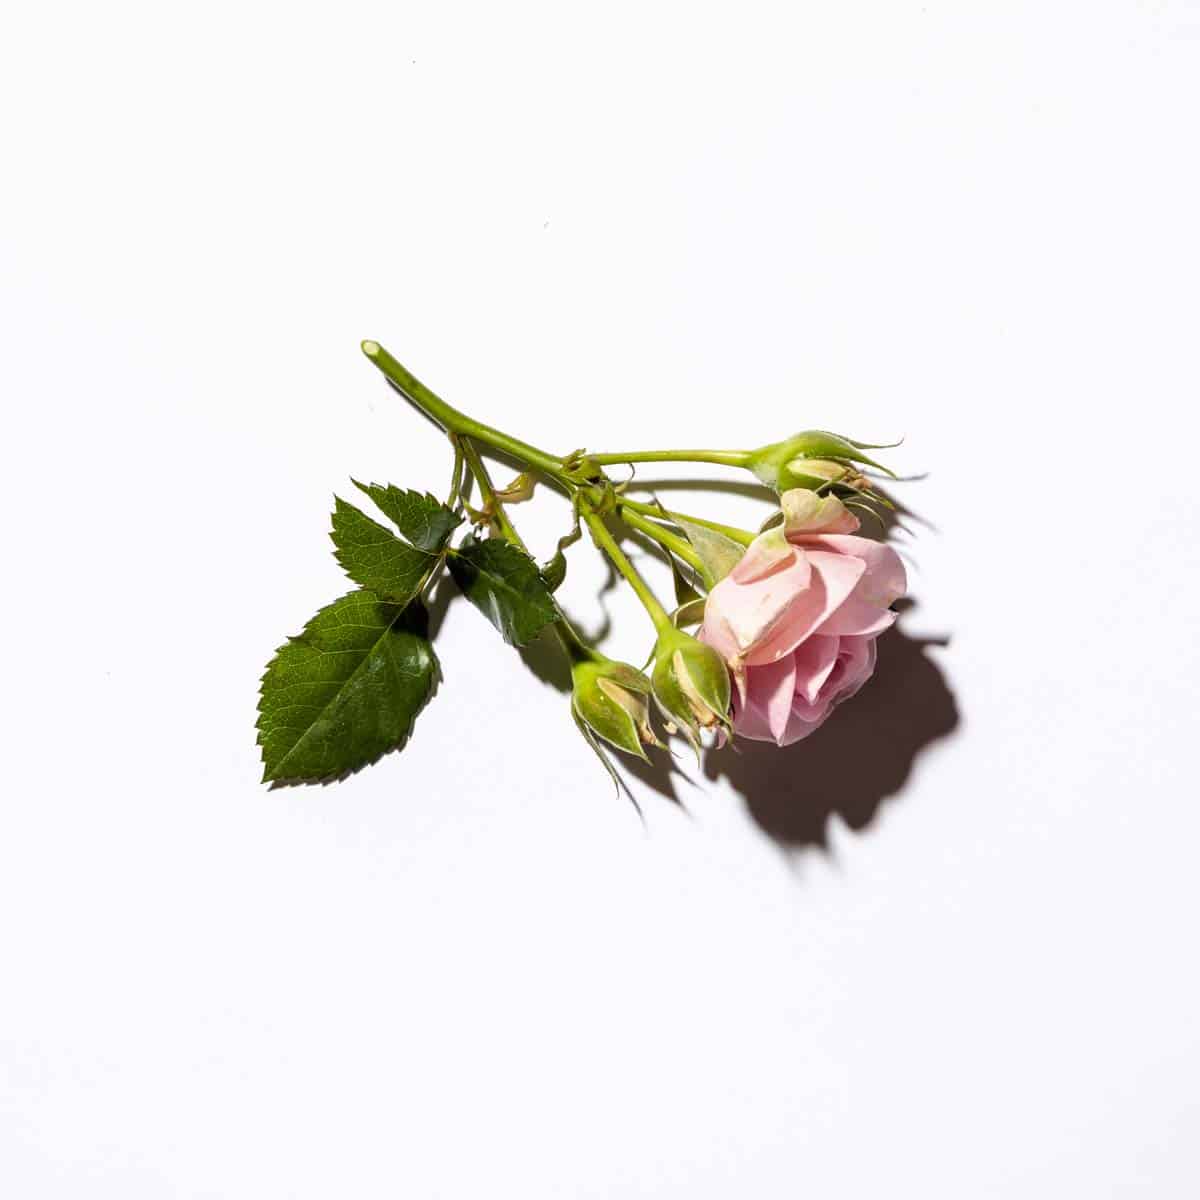 pink rose on white background